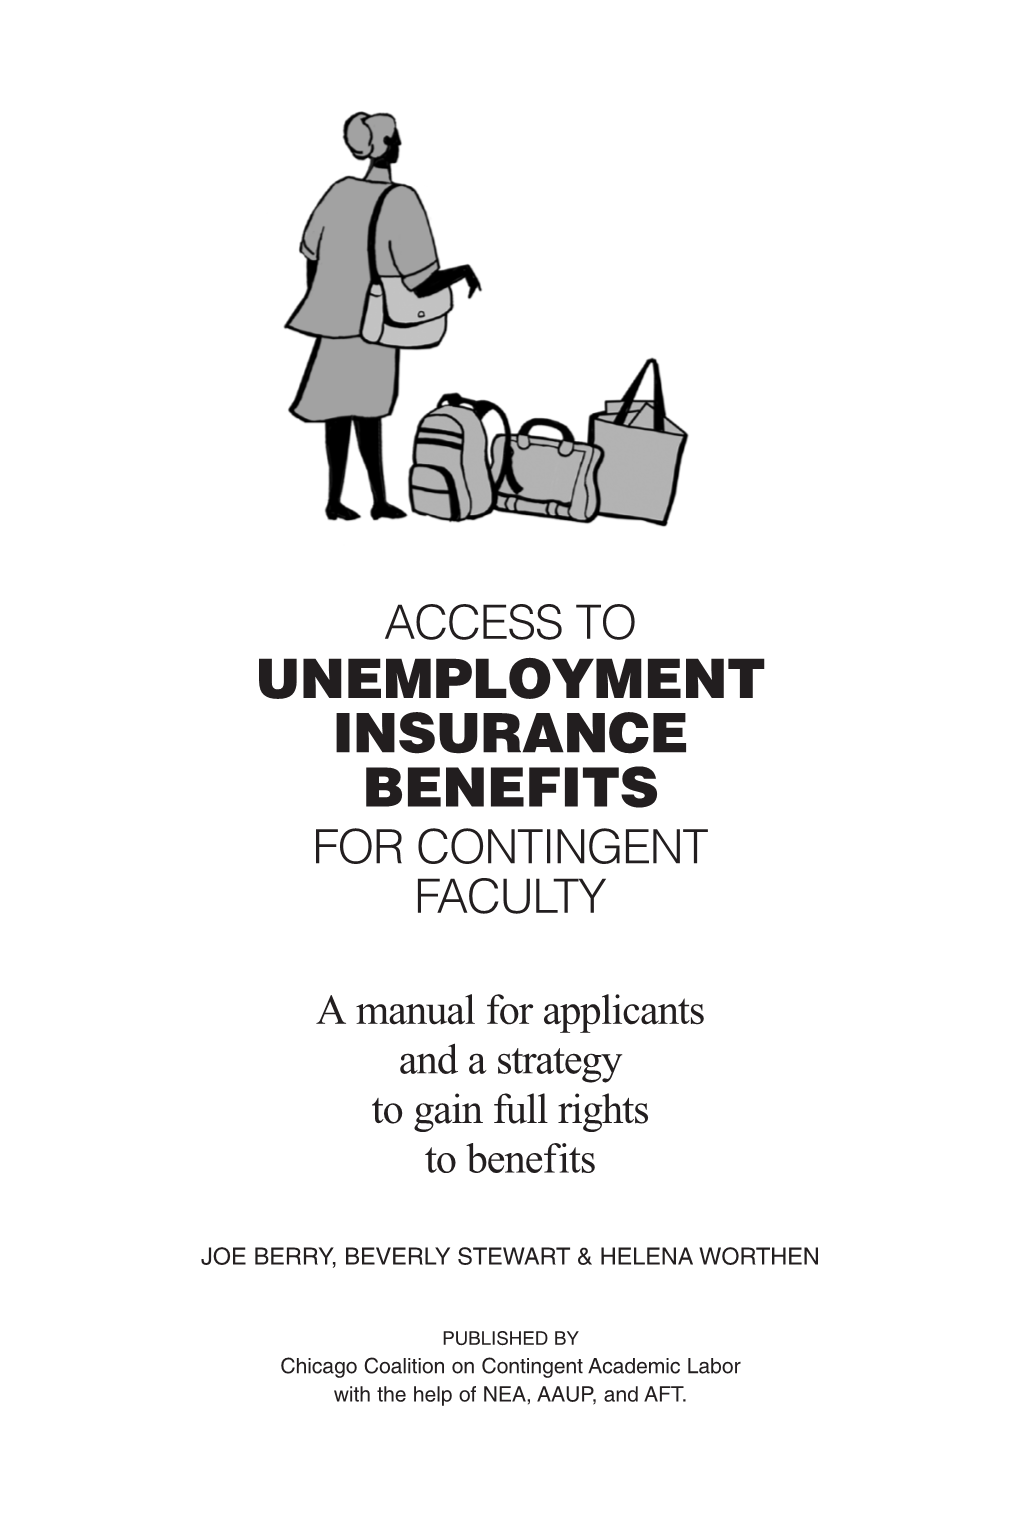 Access to Unemployment Insurance Benefits for Contingent Faculty